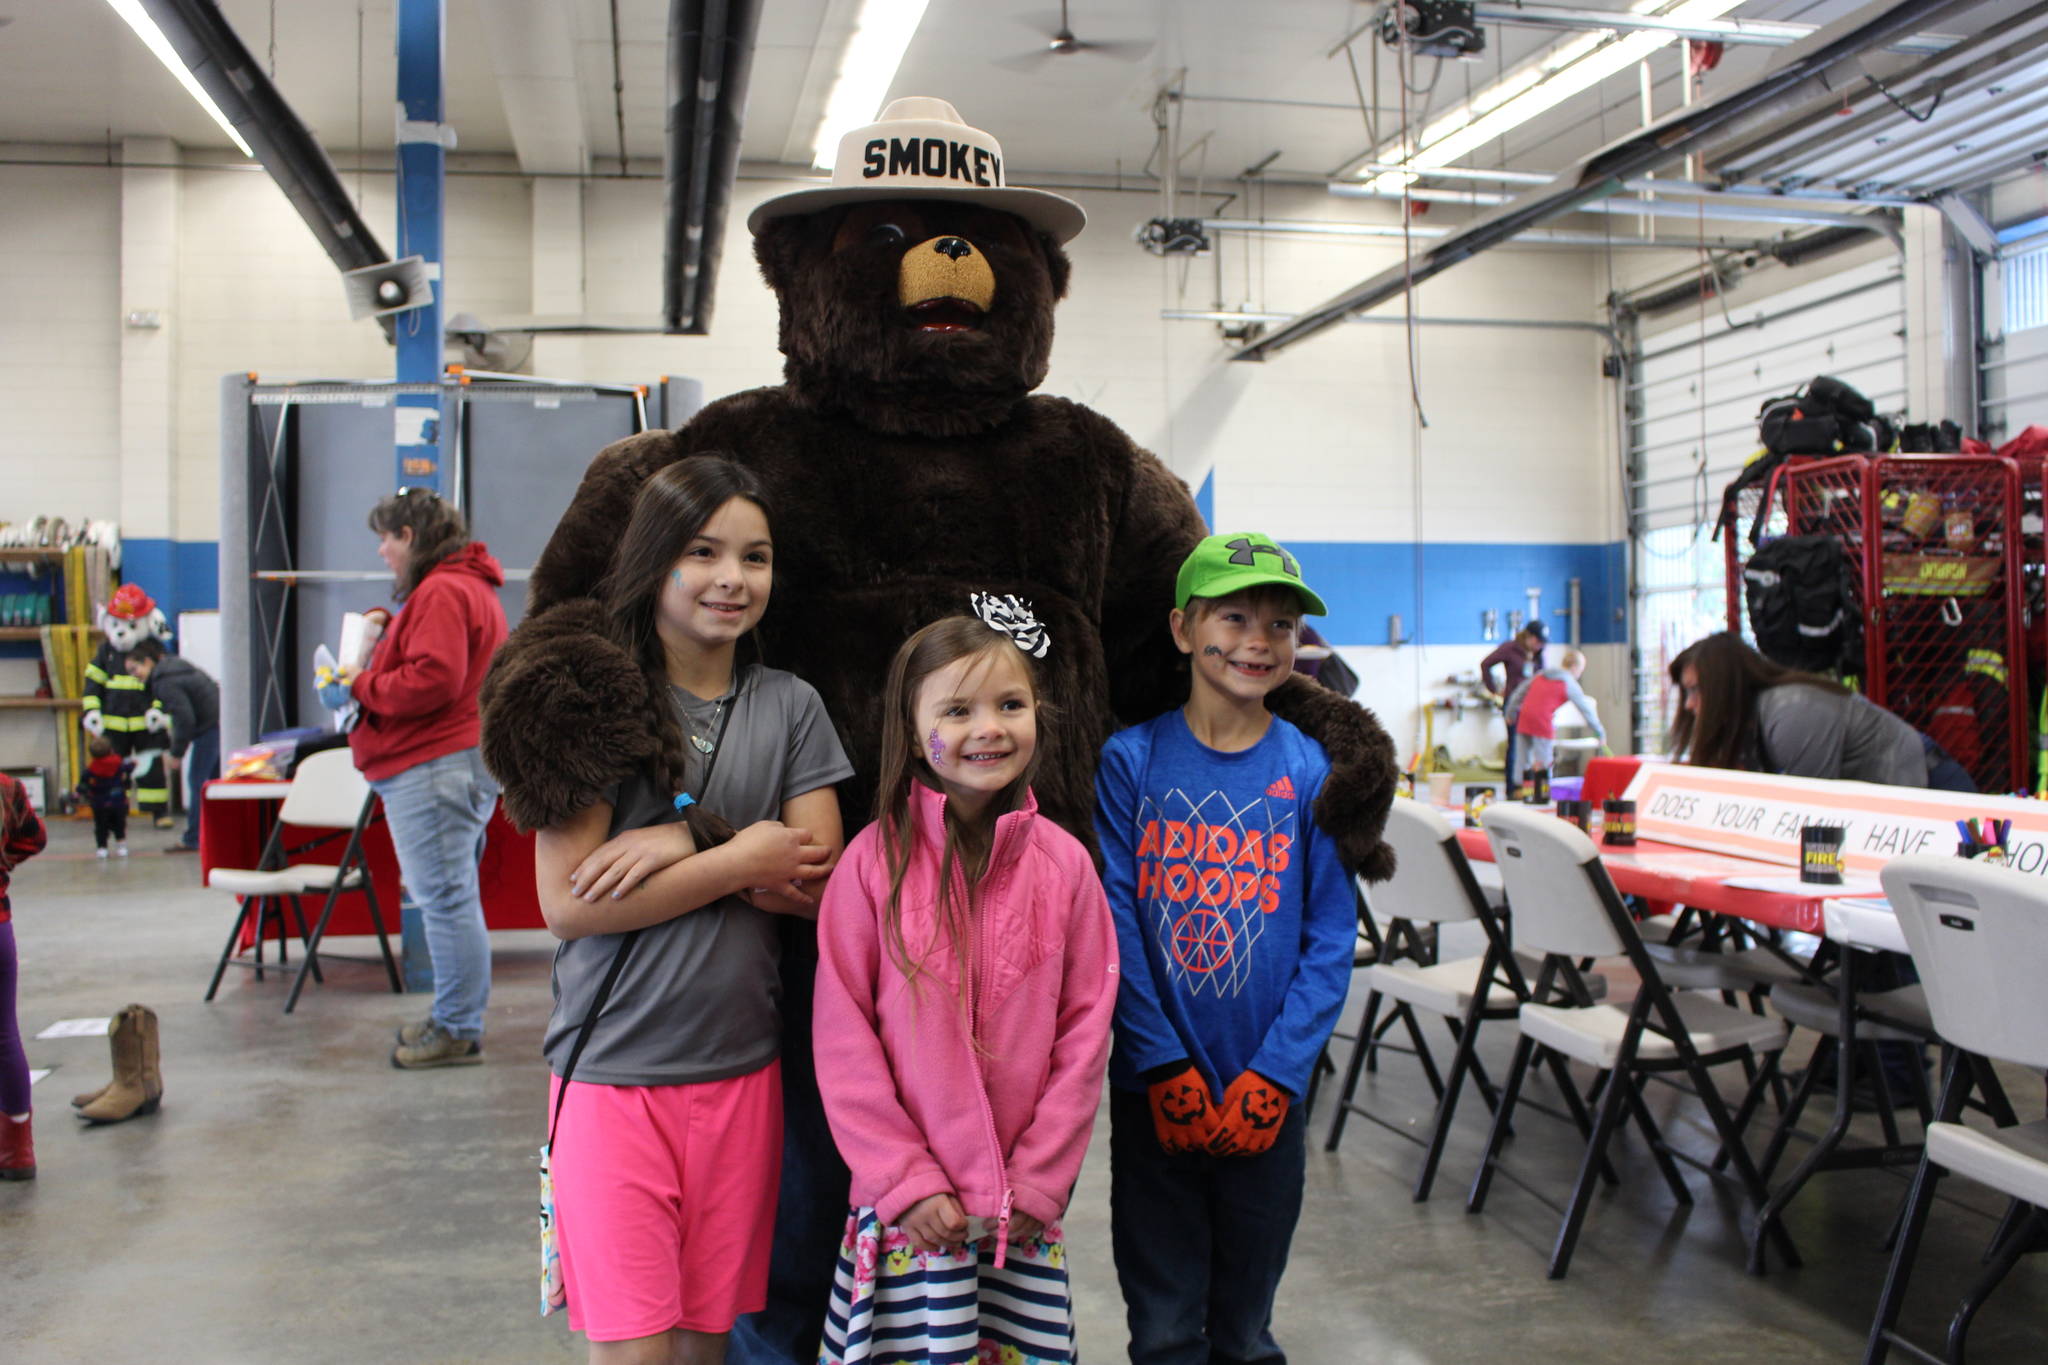 Lily Ratliff, Addy Ratliff and Jaxon Ratliff pose with Smokey the Bear during the Central Emergency Services Open House at Fire Station 1 in Soldotna, Alaska on Sept. 28, 2019. (Photo by Brian Mazurek/Peninsula Clarion)